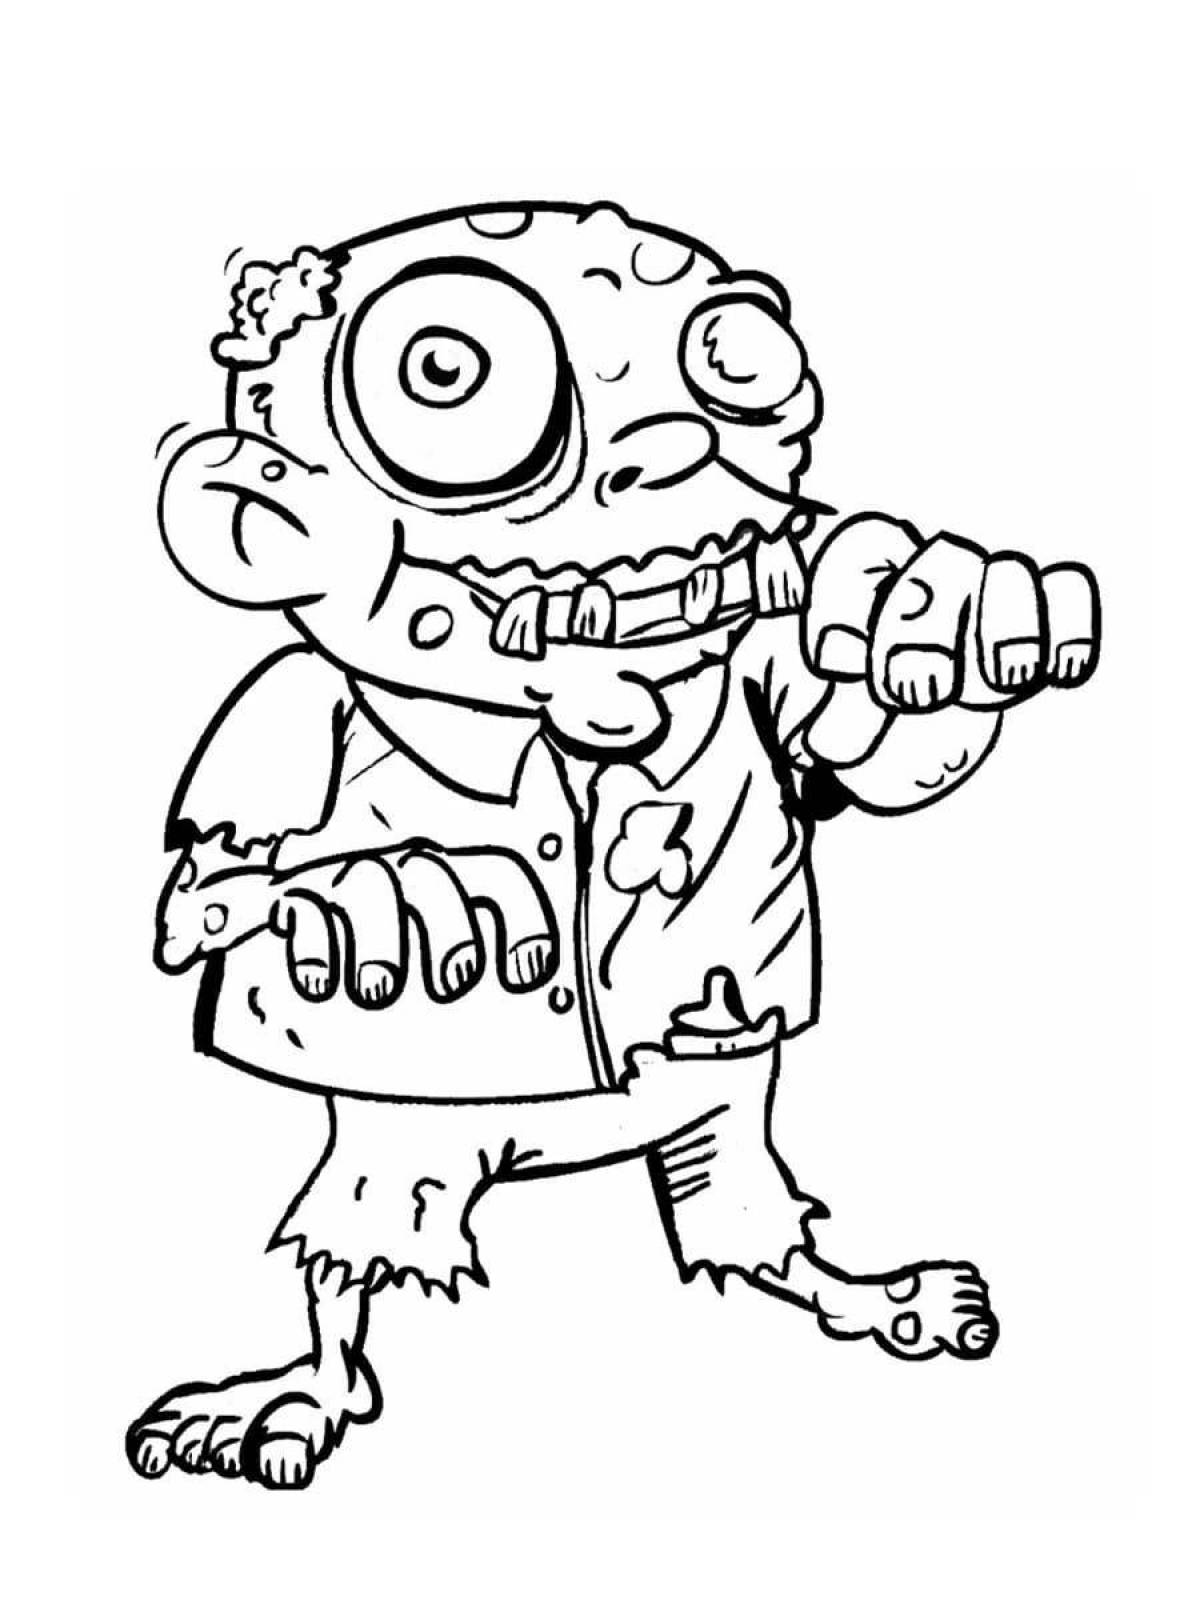 Mysterious zombie catcher coloring page